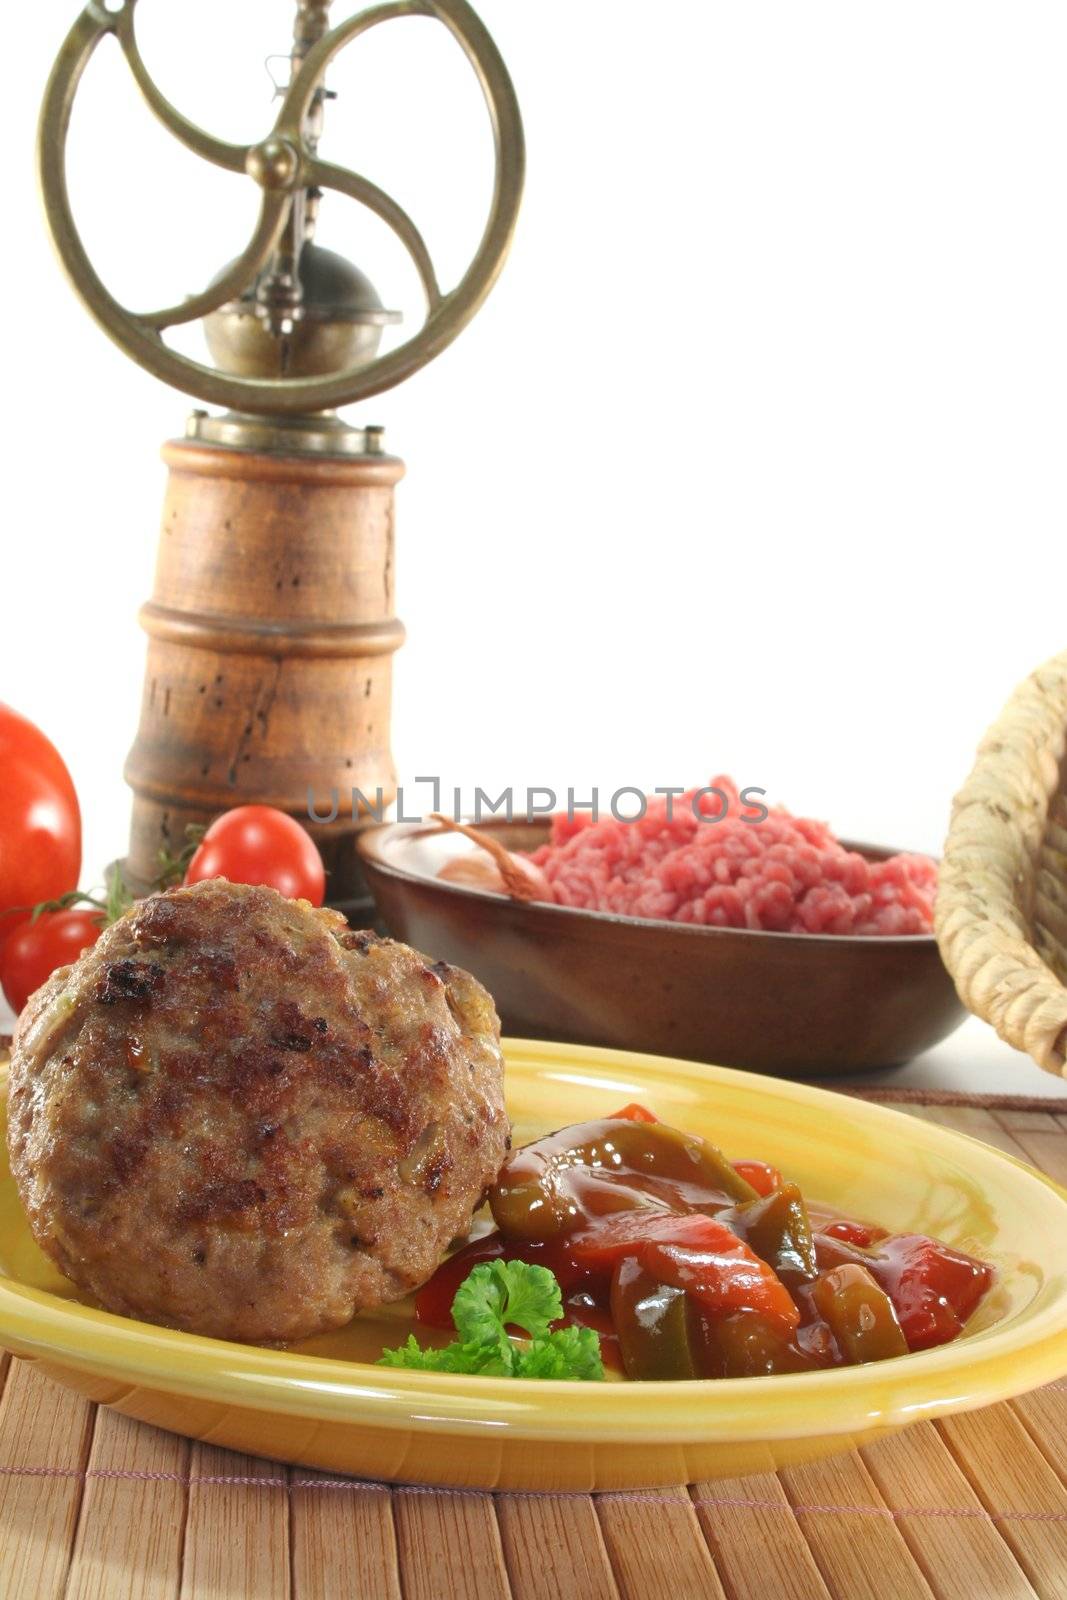 meatballs with Ratatouille by discovery